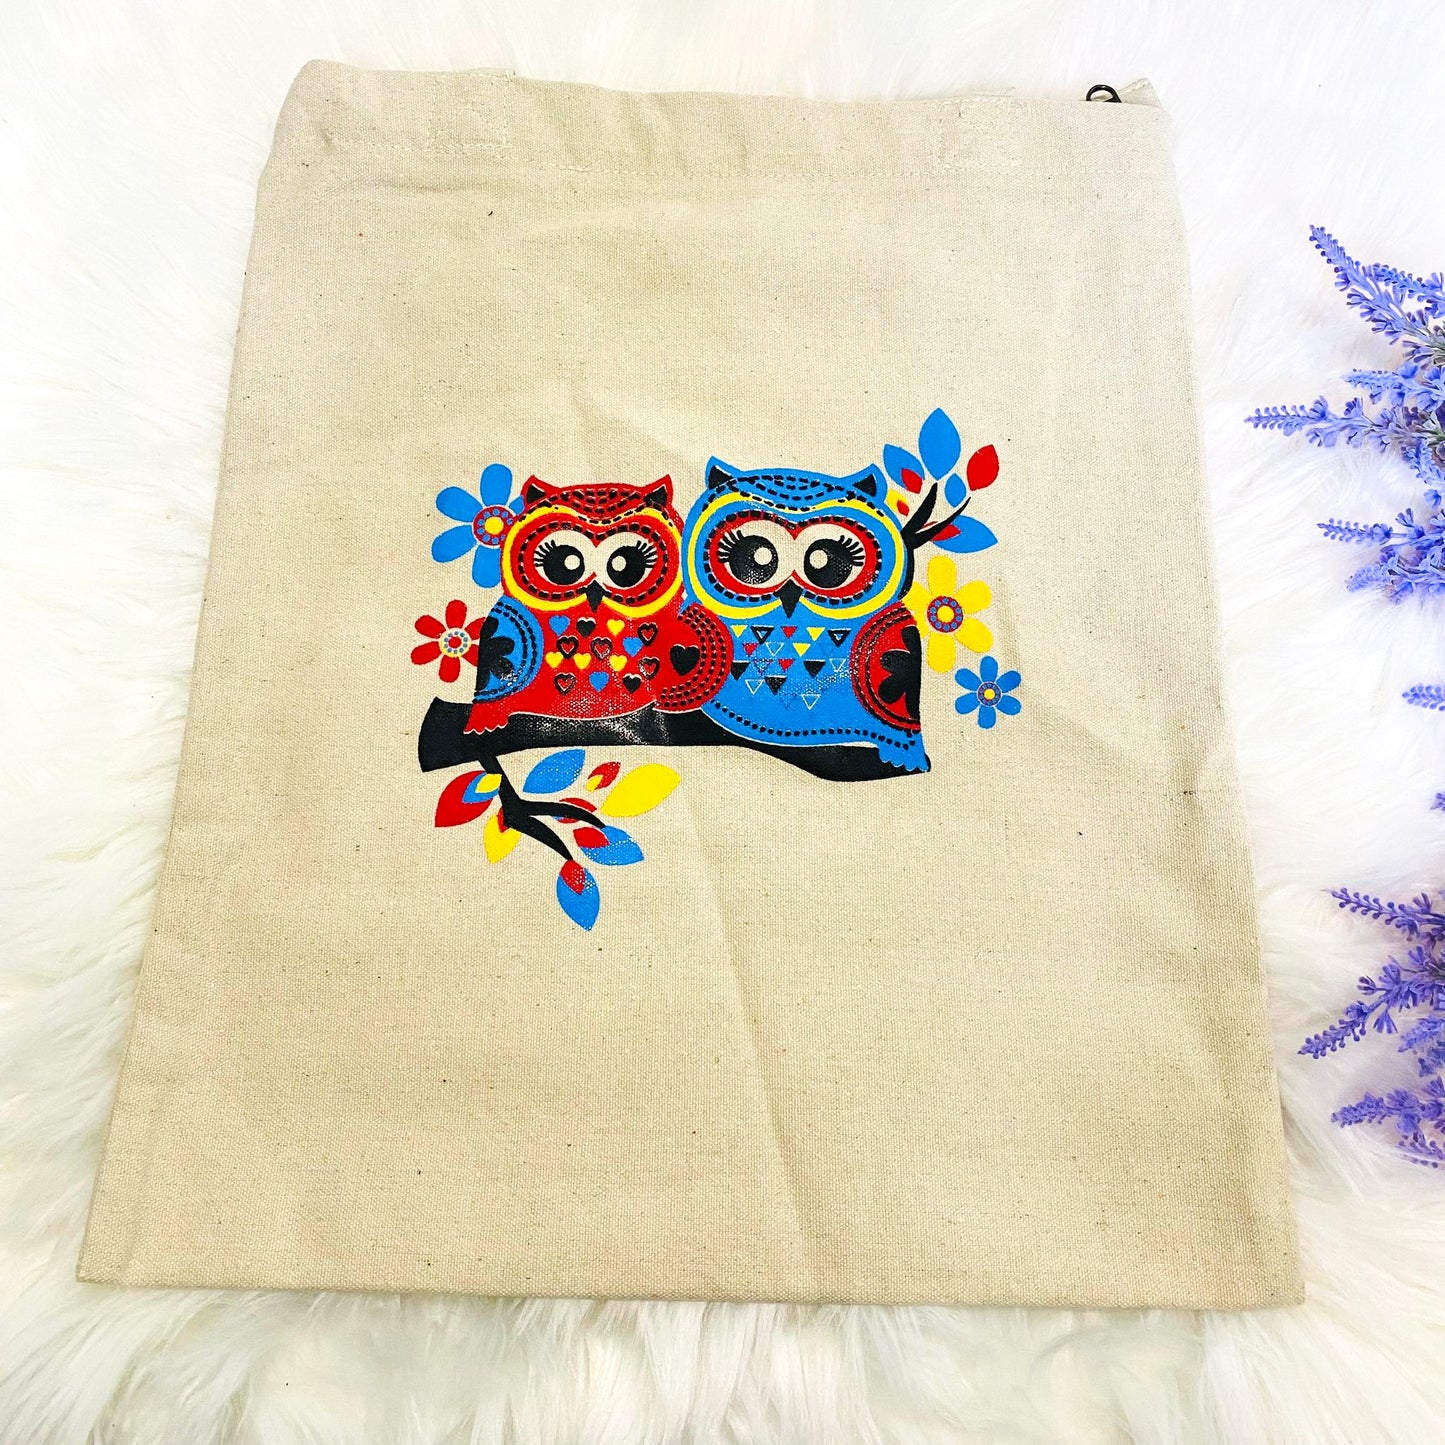 Owl Print Cotton Tote Bags, Canvas Tote Bag, Handmade Bags, Zippered Closure, Vegan Totes, Cute Tote Bags, Ecofriendly Bag, Gift For Him/Her